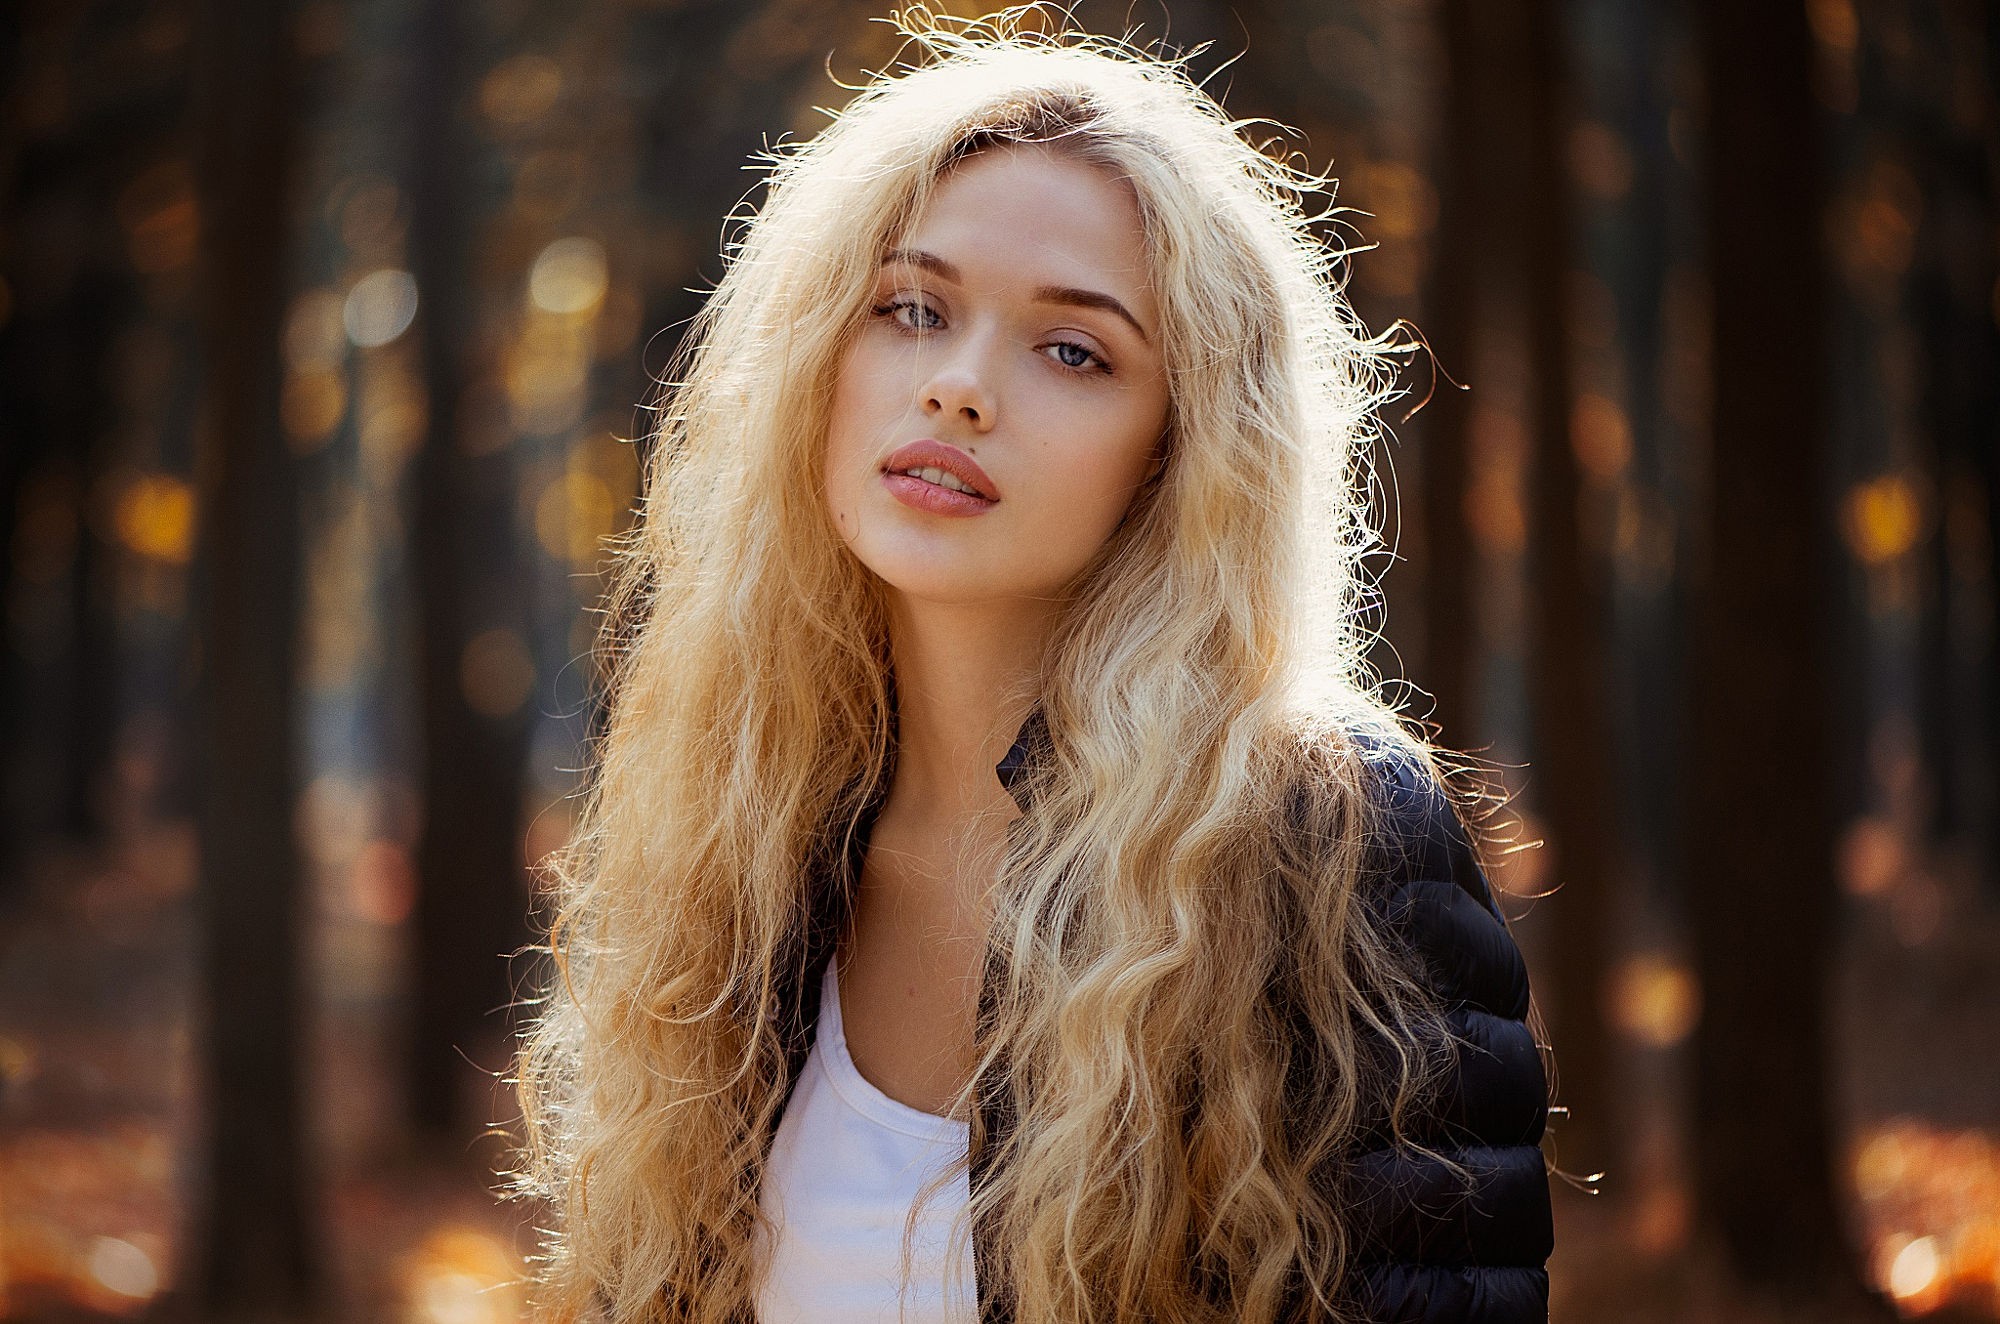 Long Curly Blonde Hair: The Ultimate Guide for Styling and Maintenance - wide 11